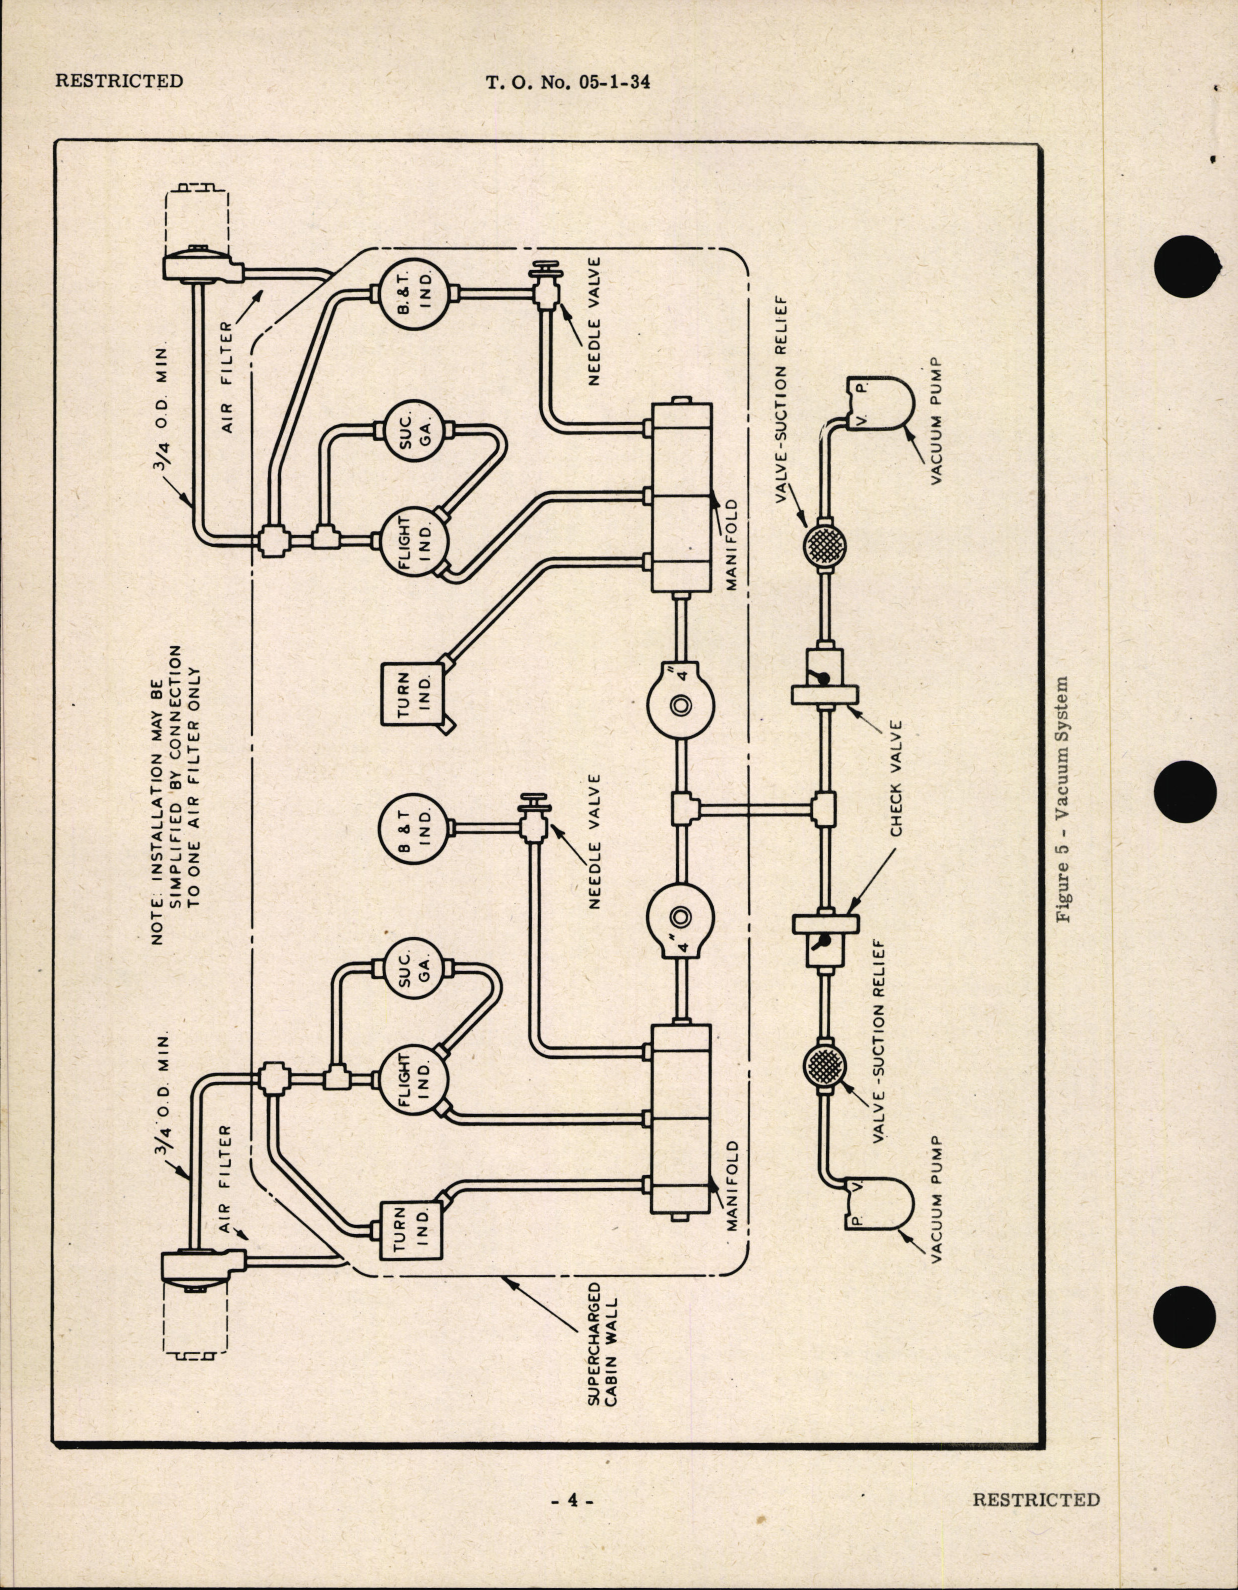 Sample page 8 from AirCorps Library document: Handbook of Instructions with Parts Catalog for Type PA-12 Air Filter